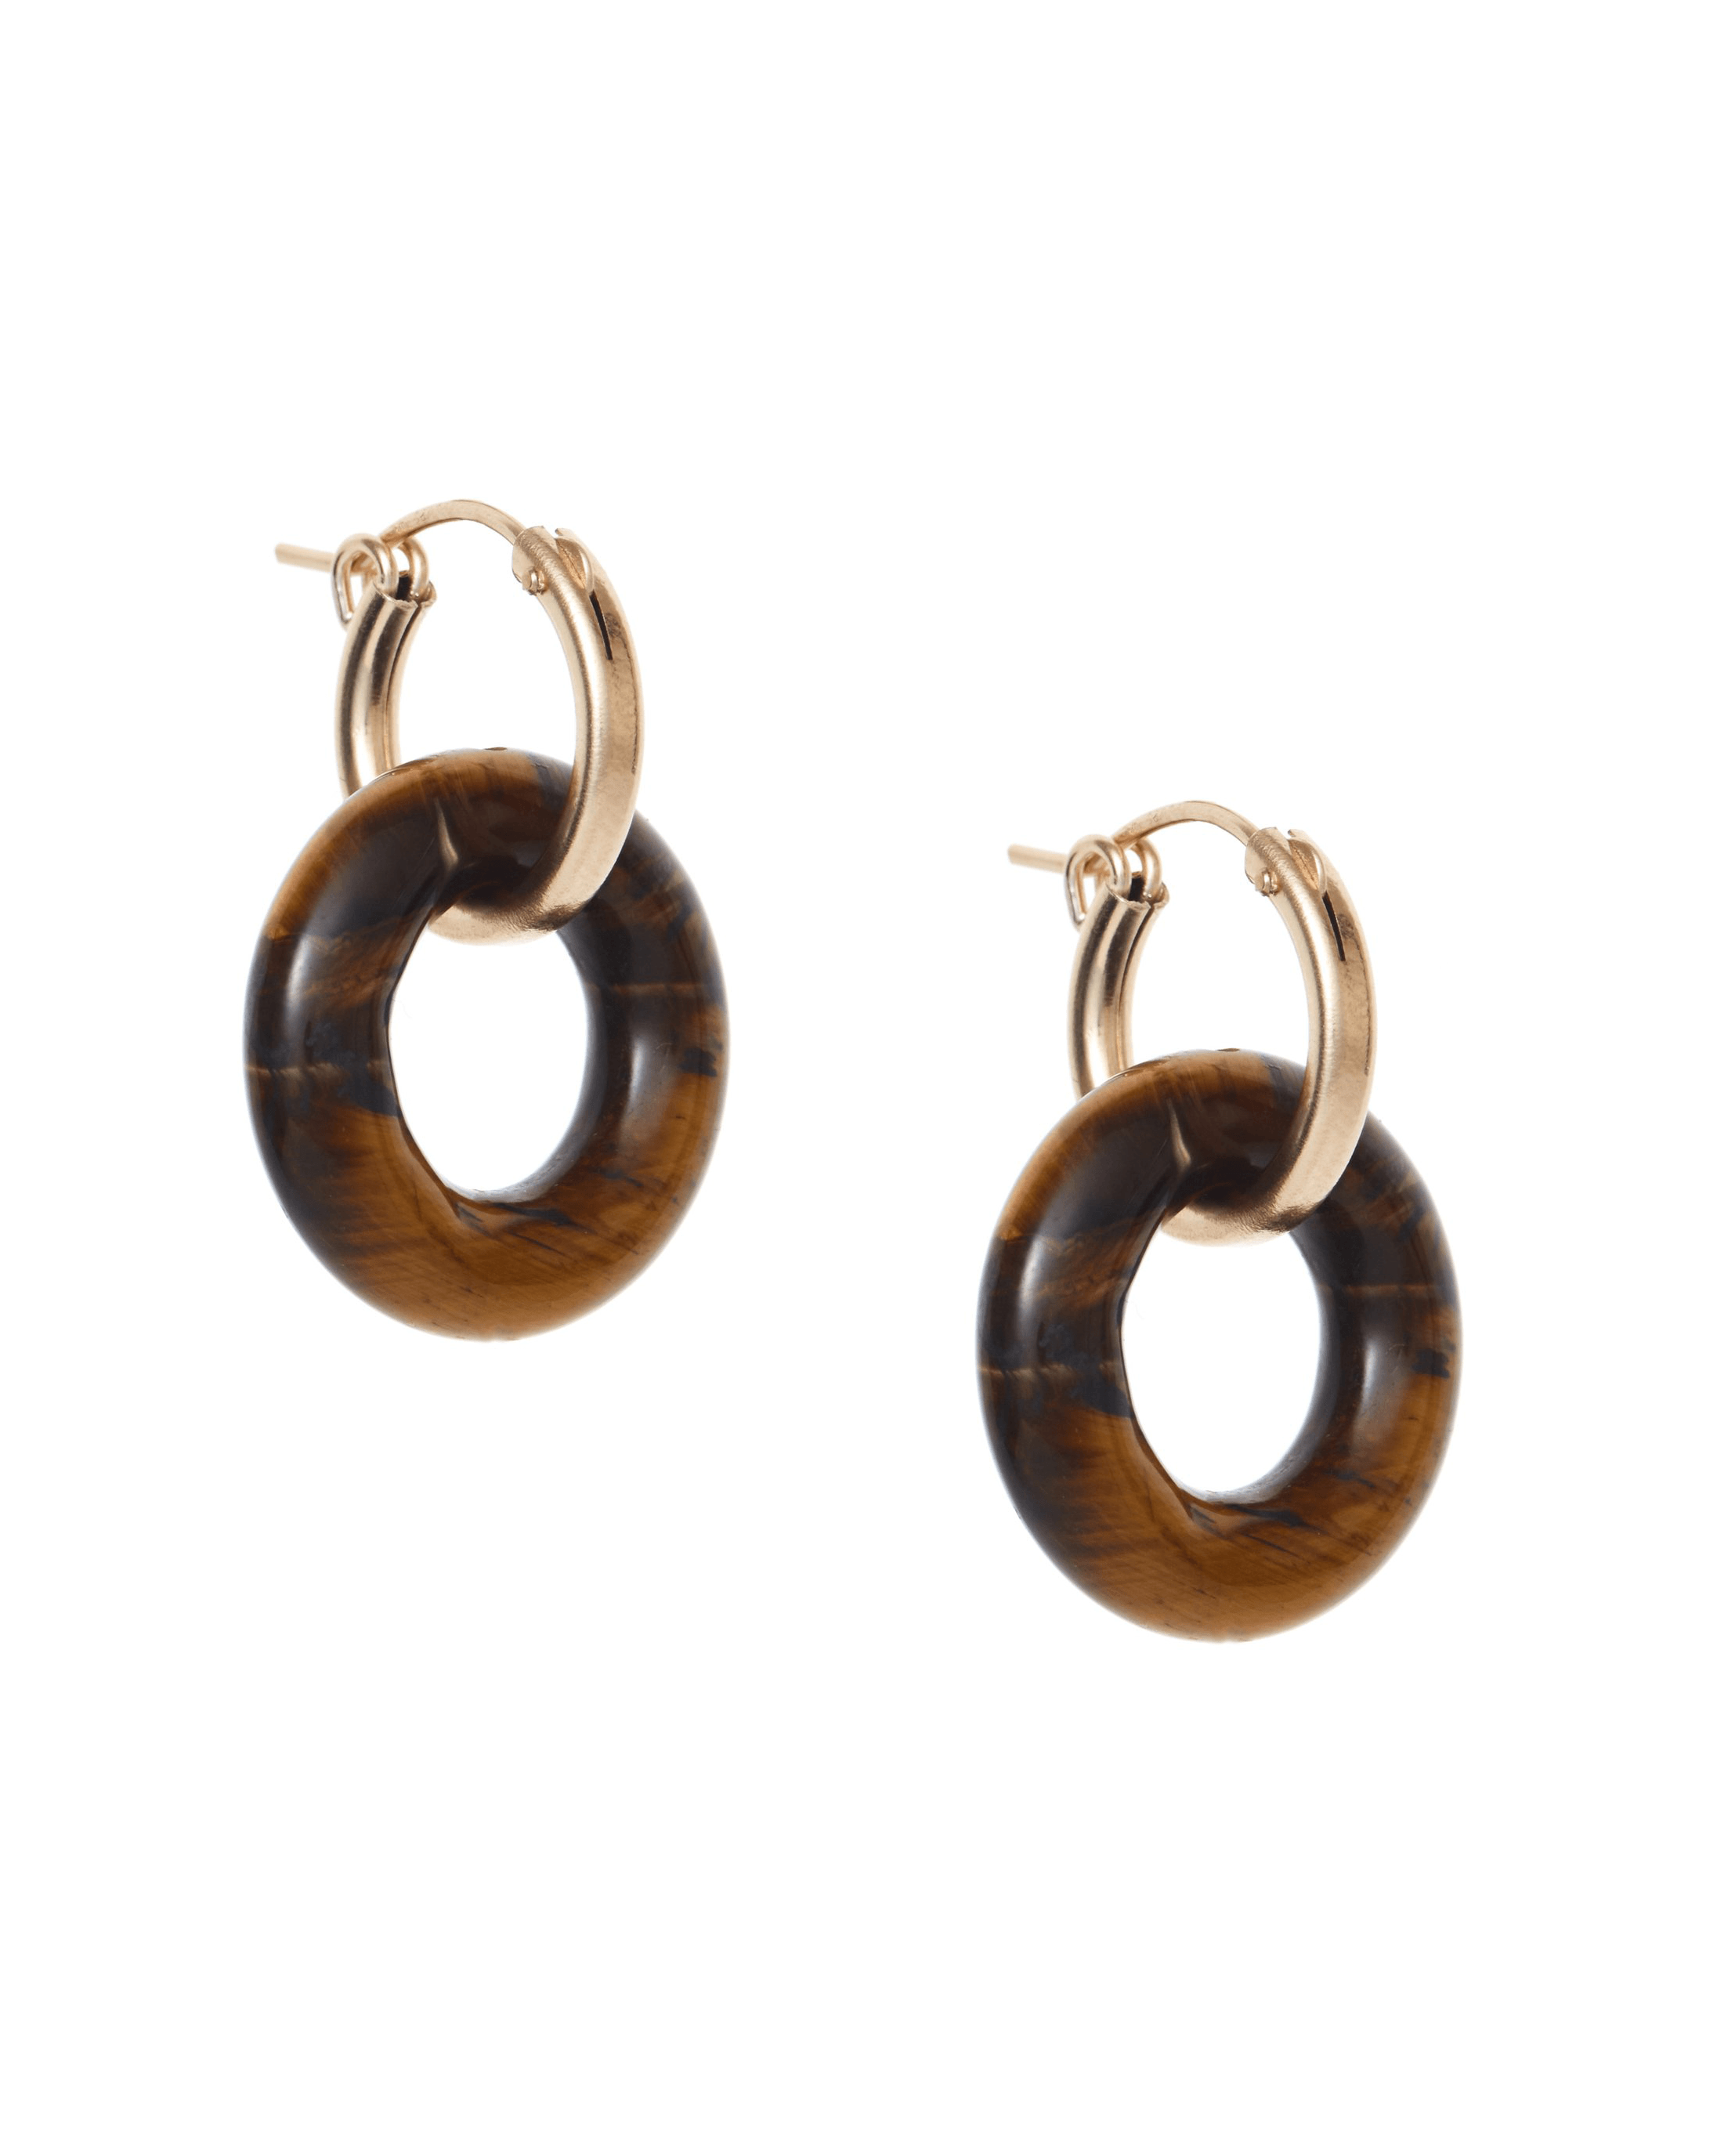 Cerceau Hoops by Kozakh. 15mm hoop earrings with snap closure, crafted in 14K Gold Filled, featuring a doughnut shape Tiger's Eye gemstone.